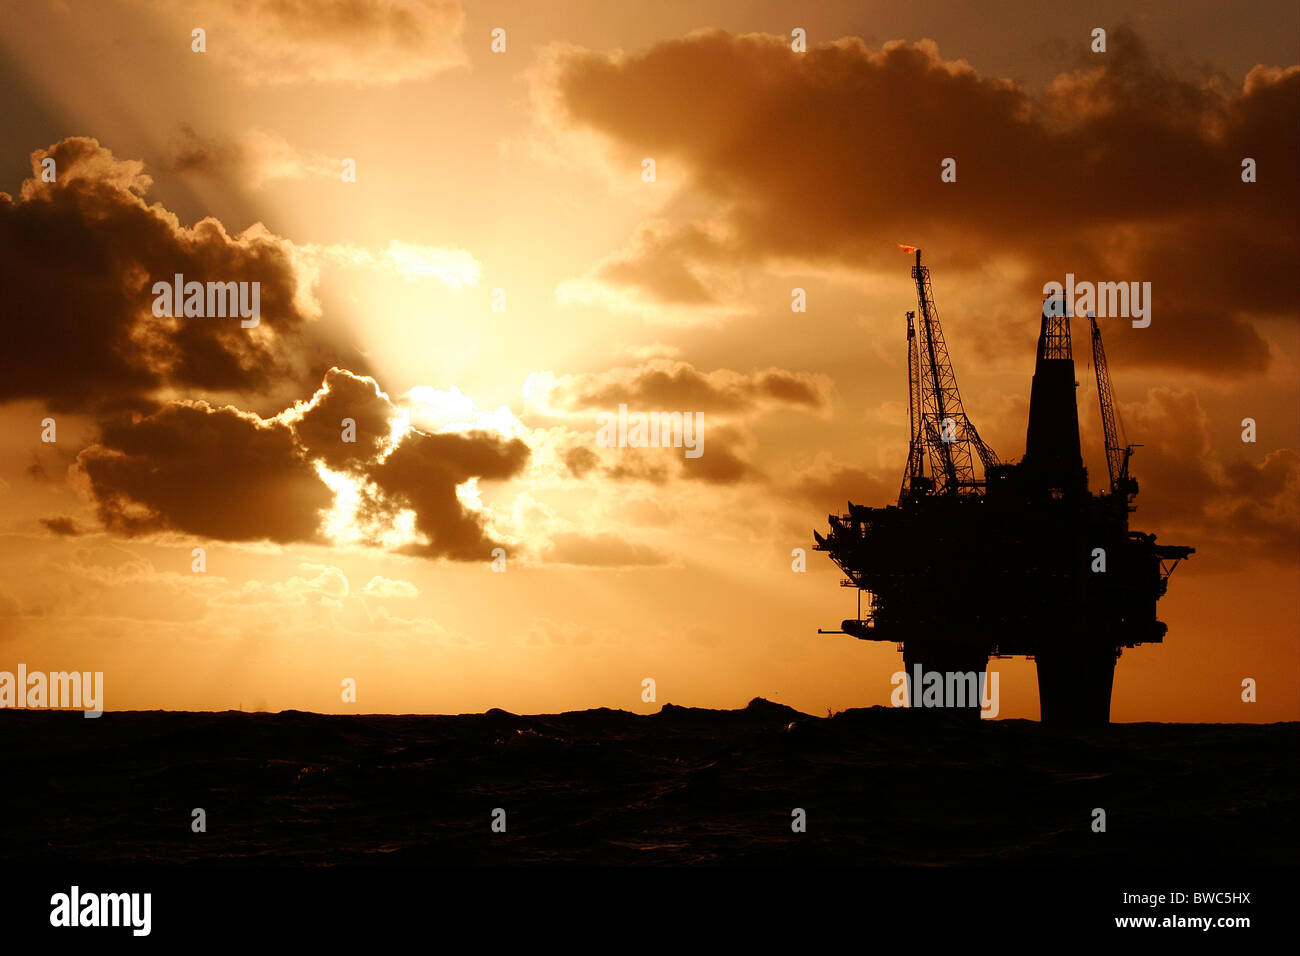 Silhouette of the Statfjord Bravo production platform in the Norwegian section of the North Sea, September 2007 Stock Photo